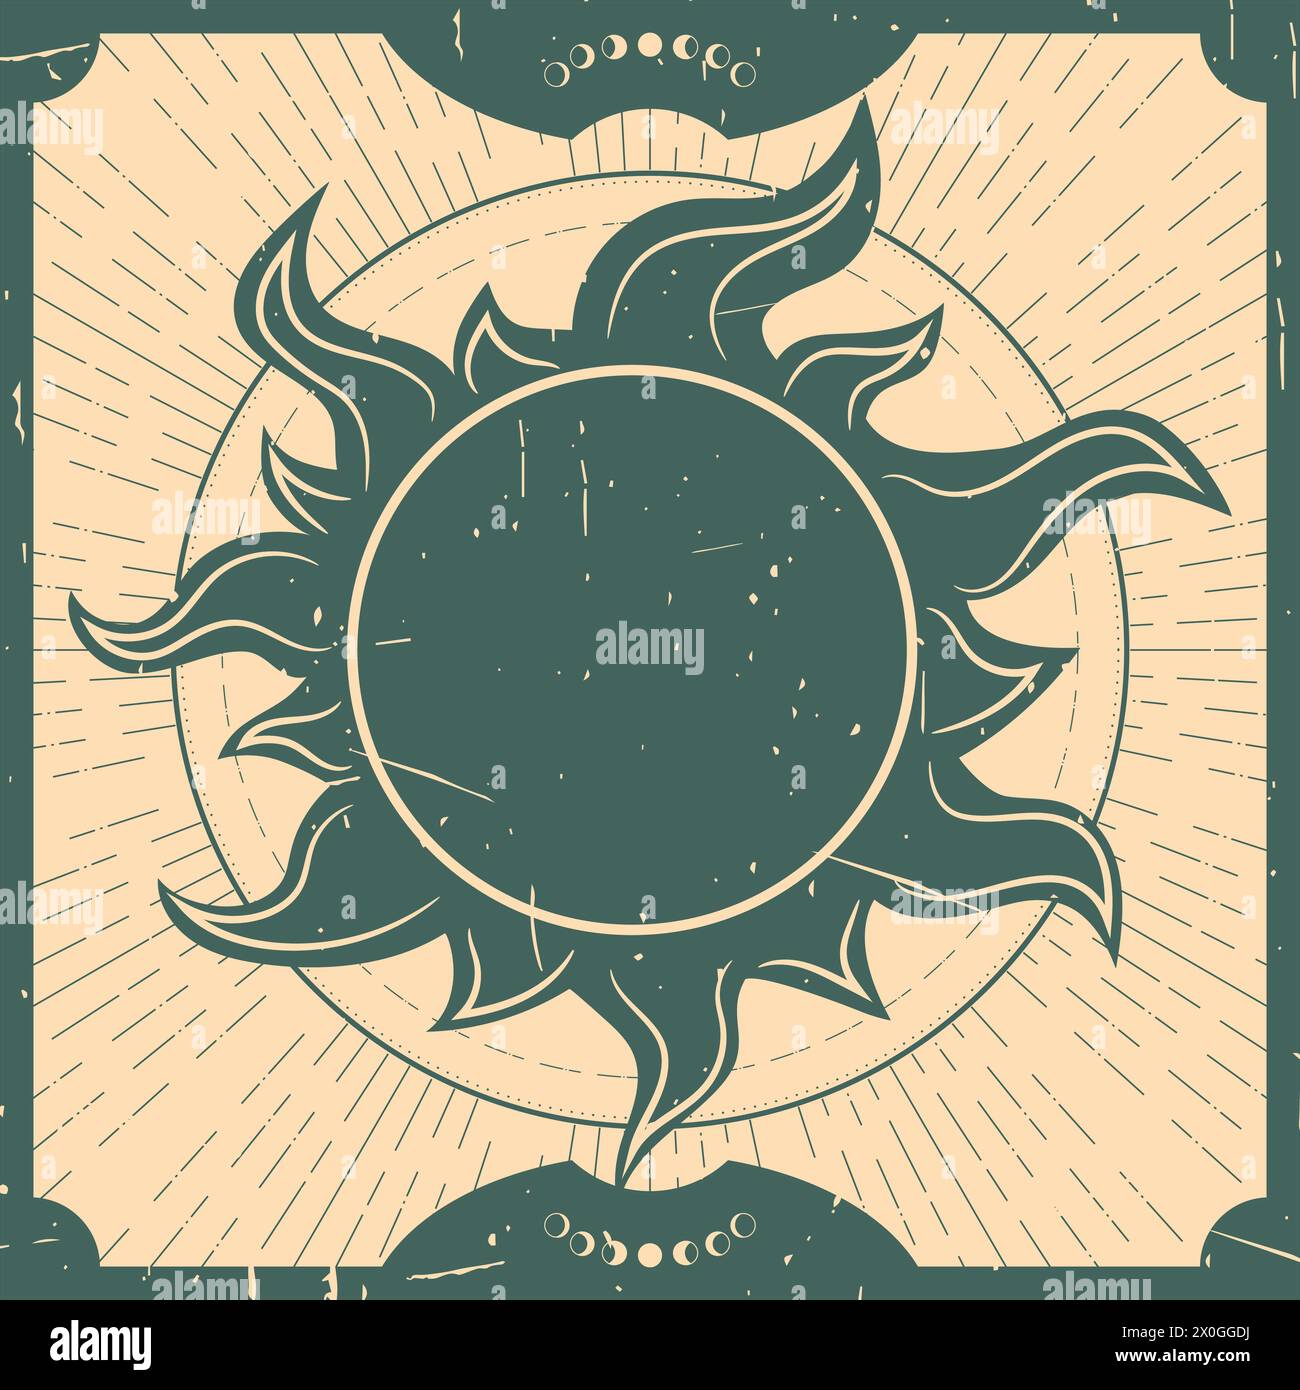 Celestial background with a sun. Spiritual chart, magic board. Vintage retro style, grunge texture. Vector illustration Stock Vector